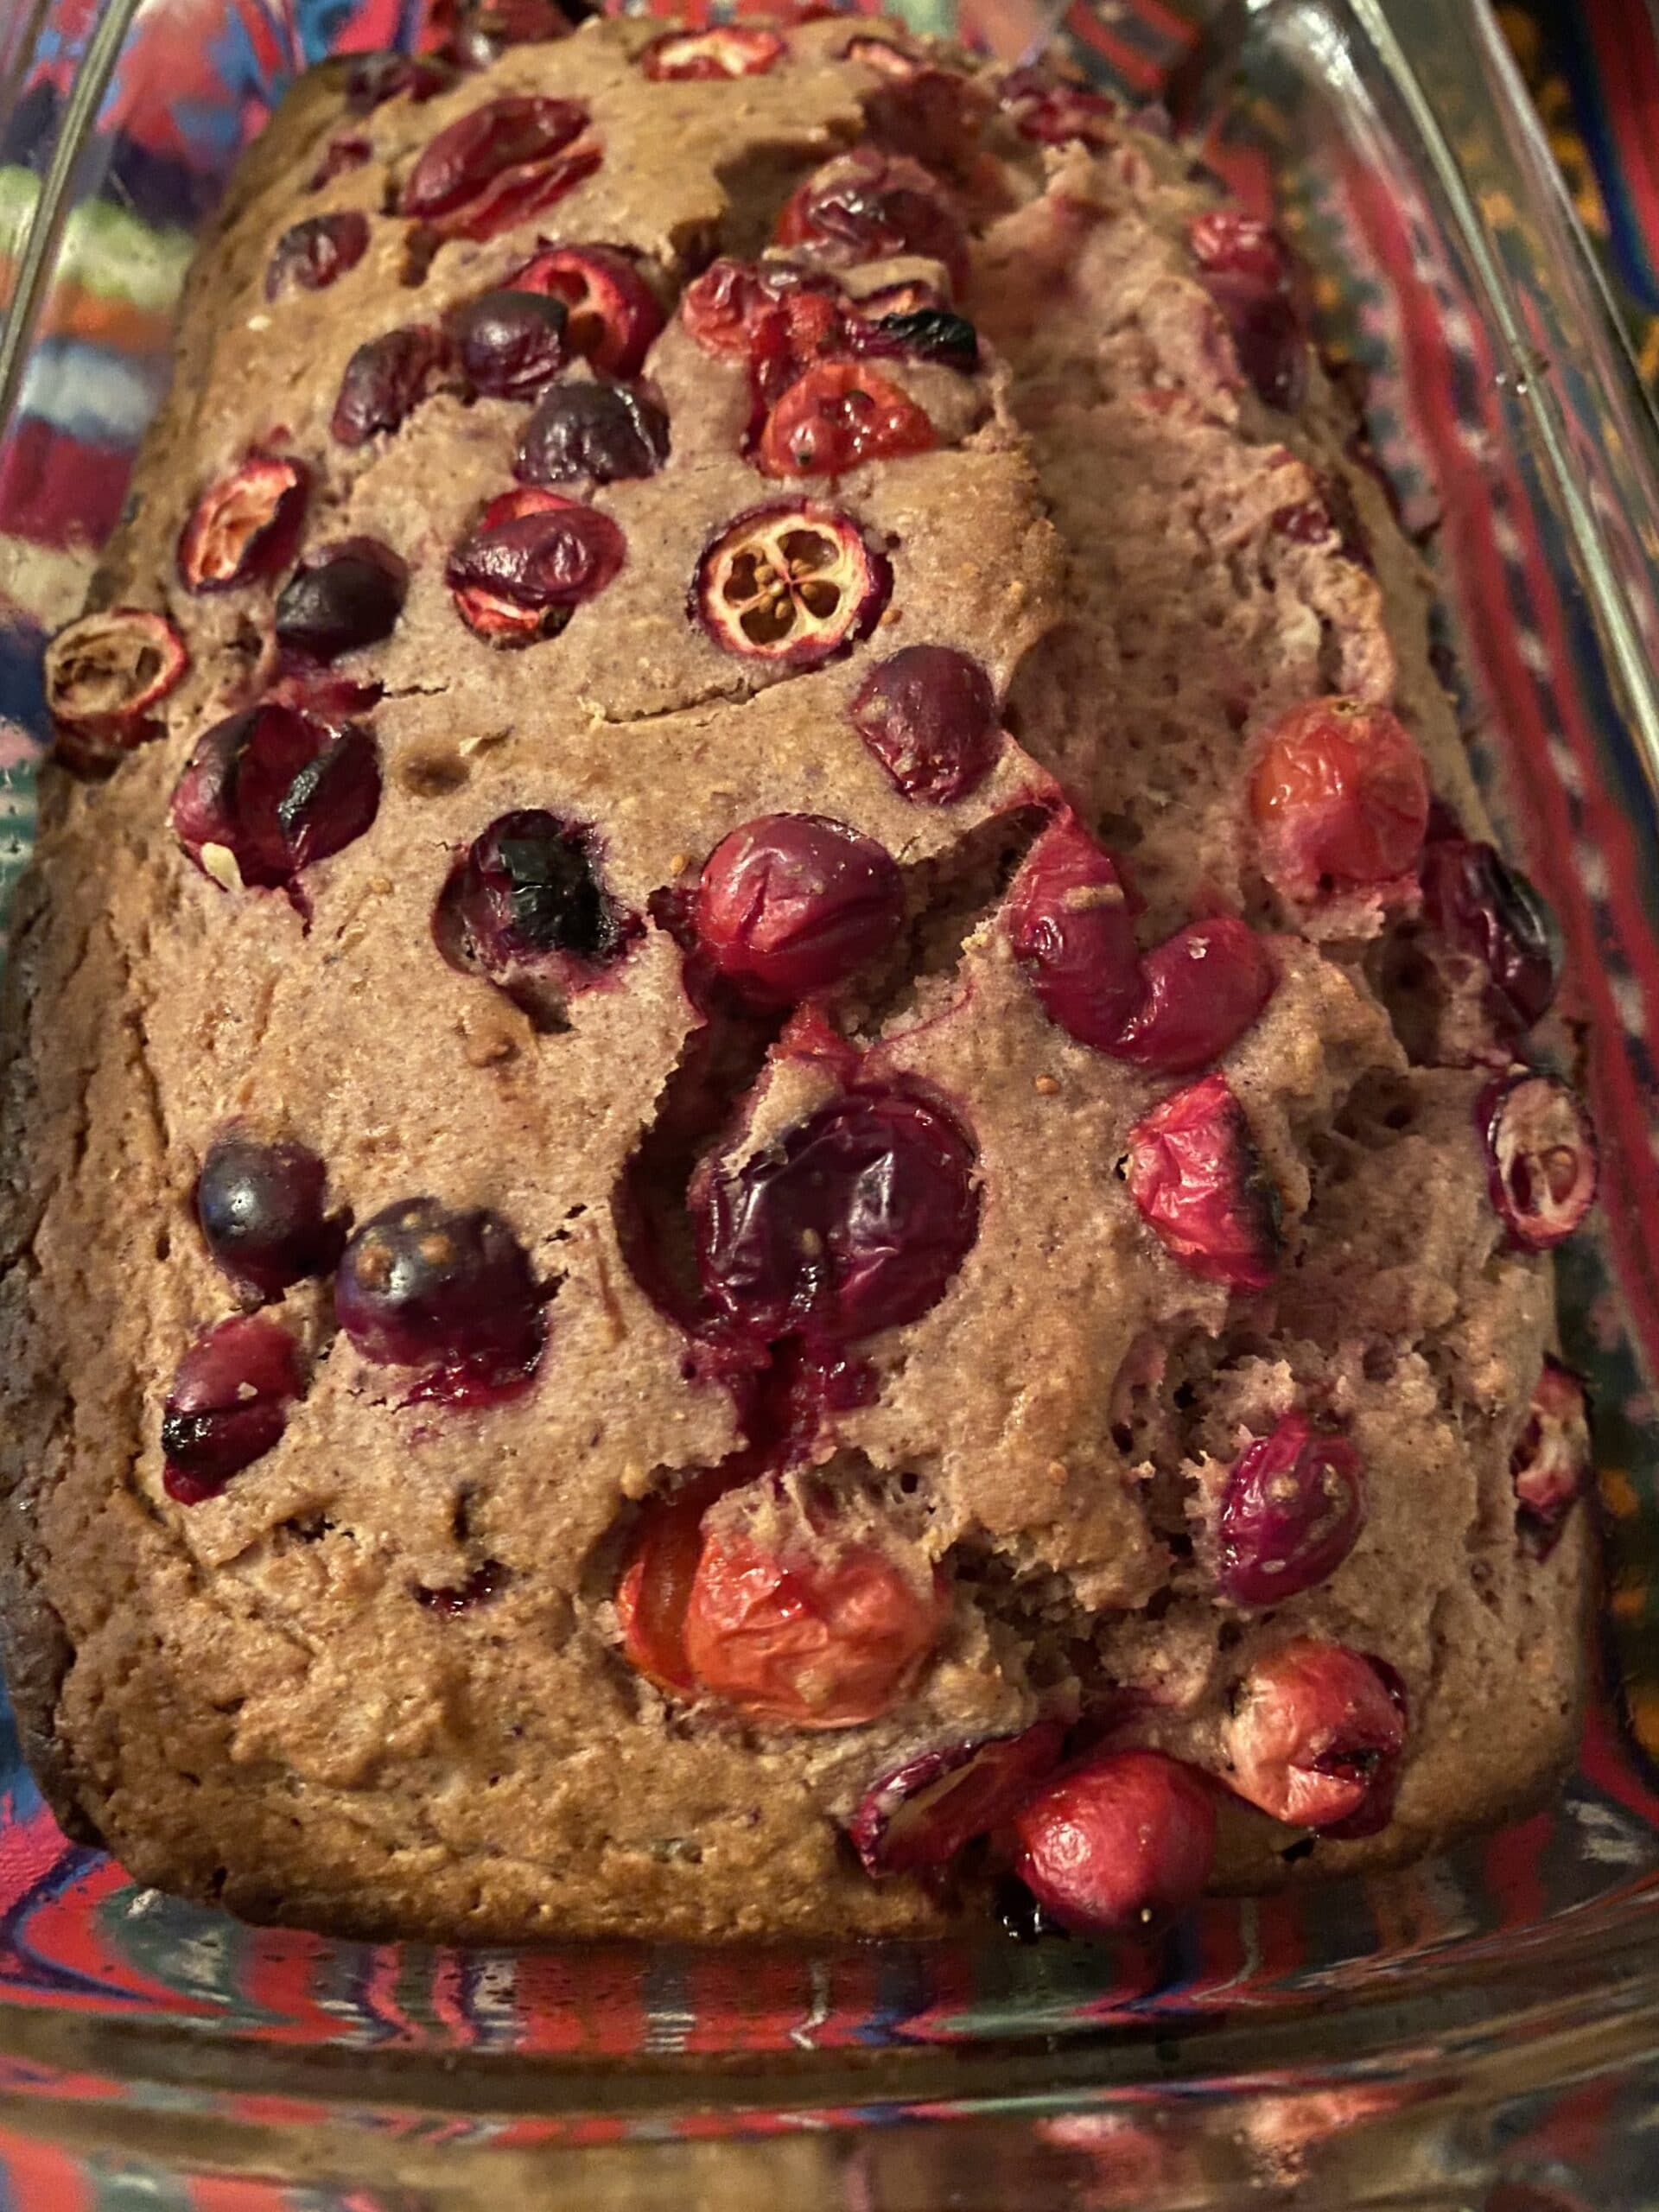 Leftover Cranberry Bread fresh out of the oven